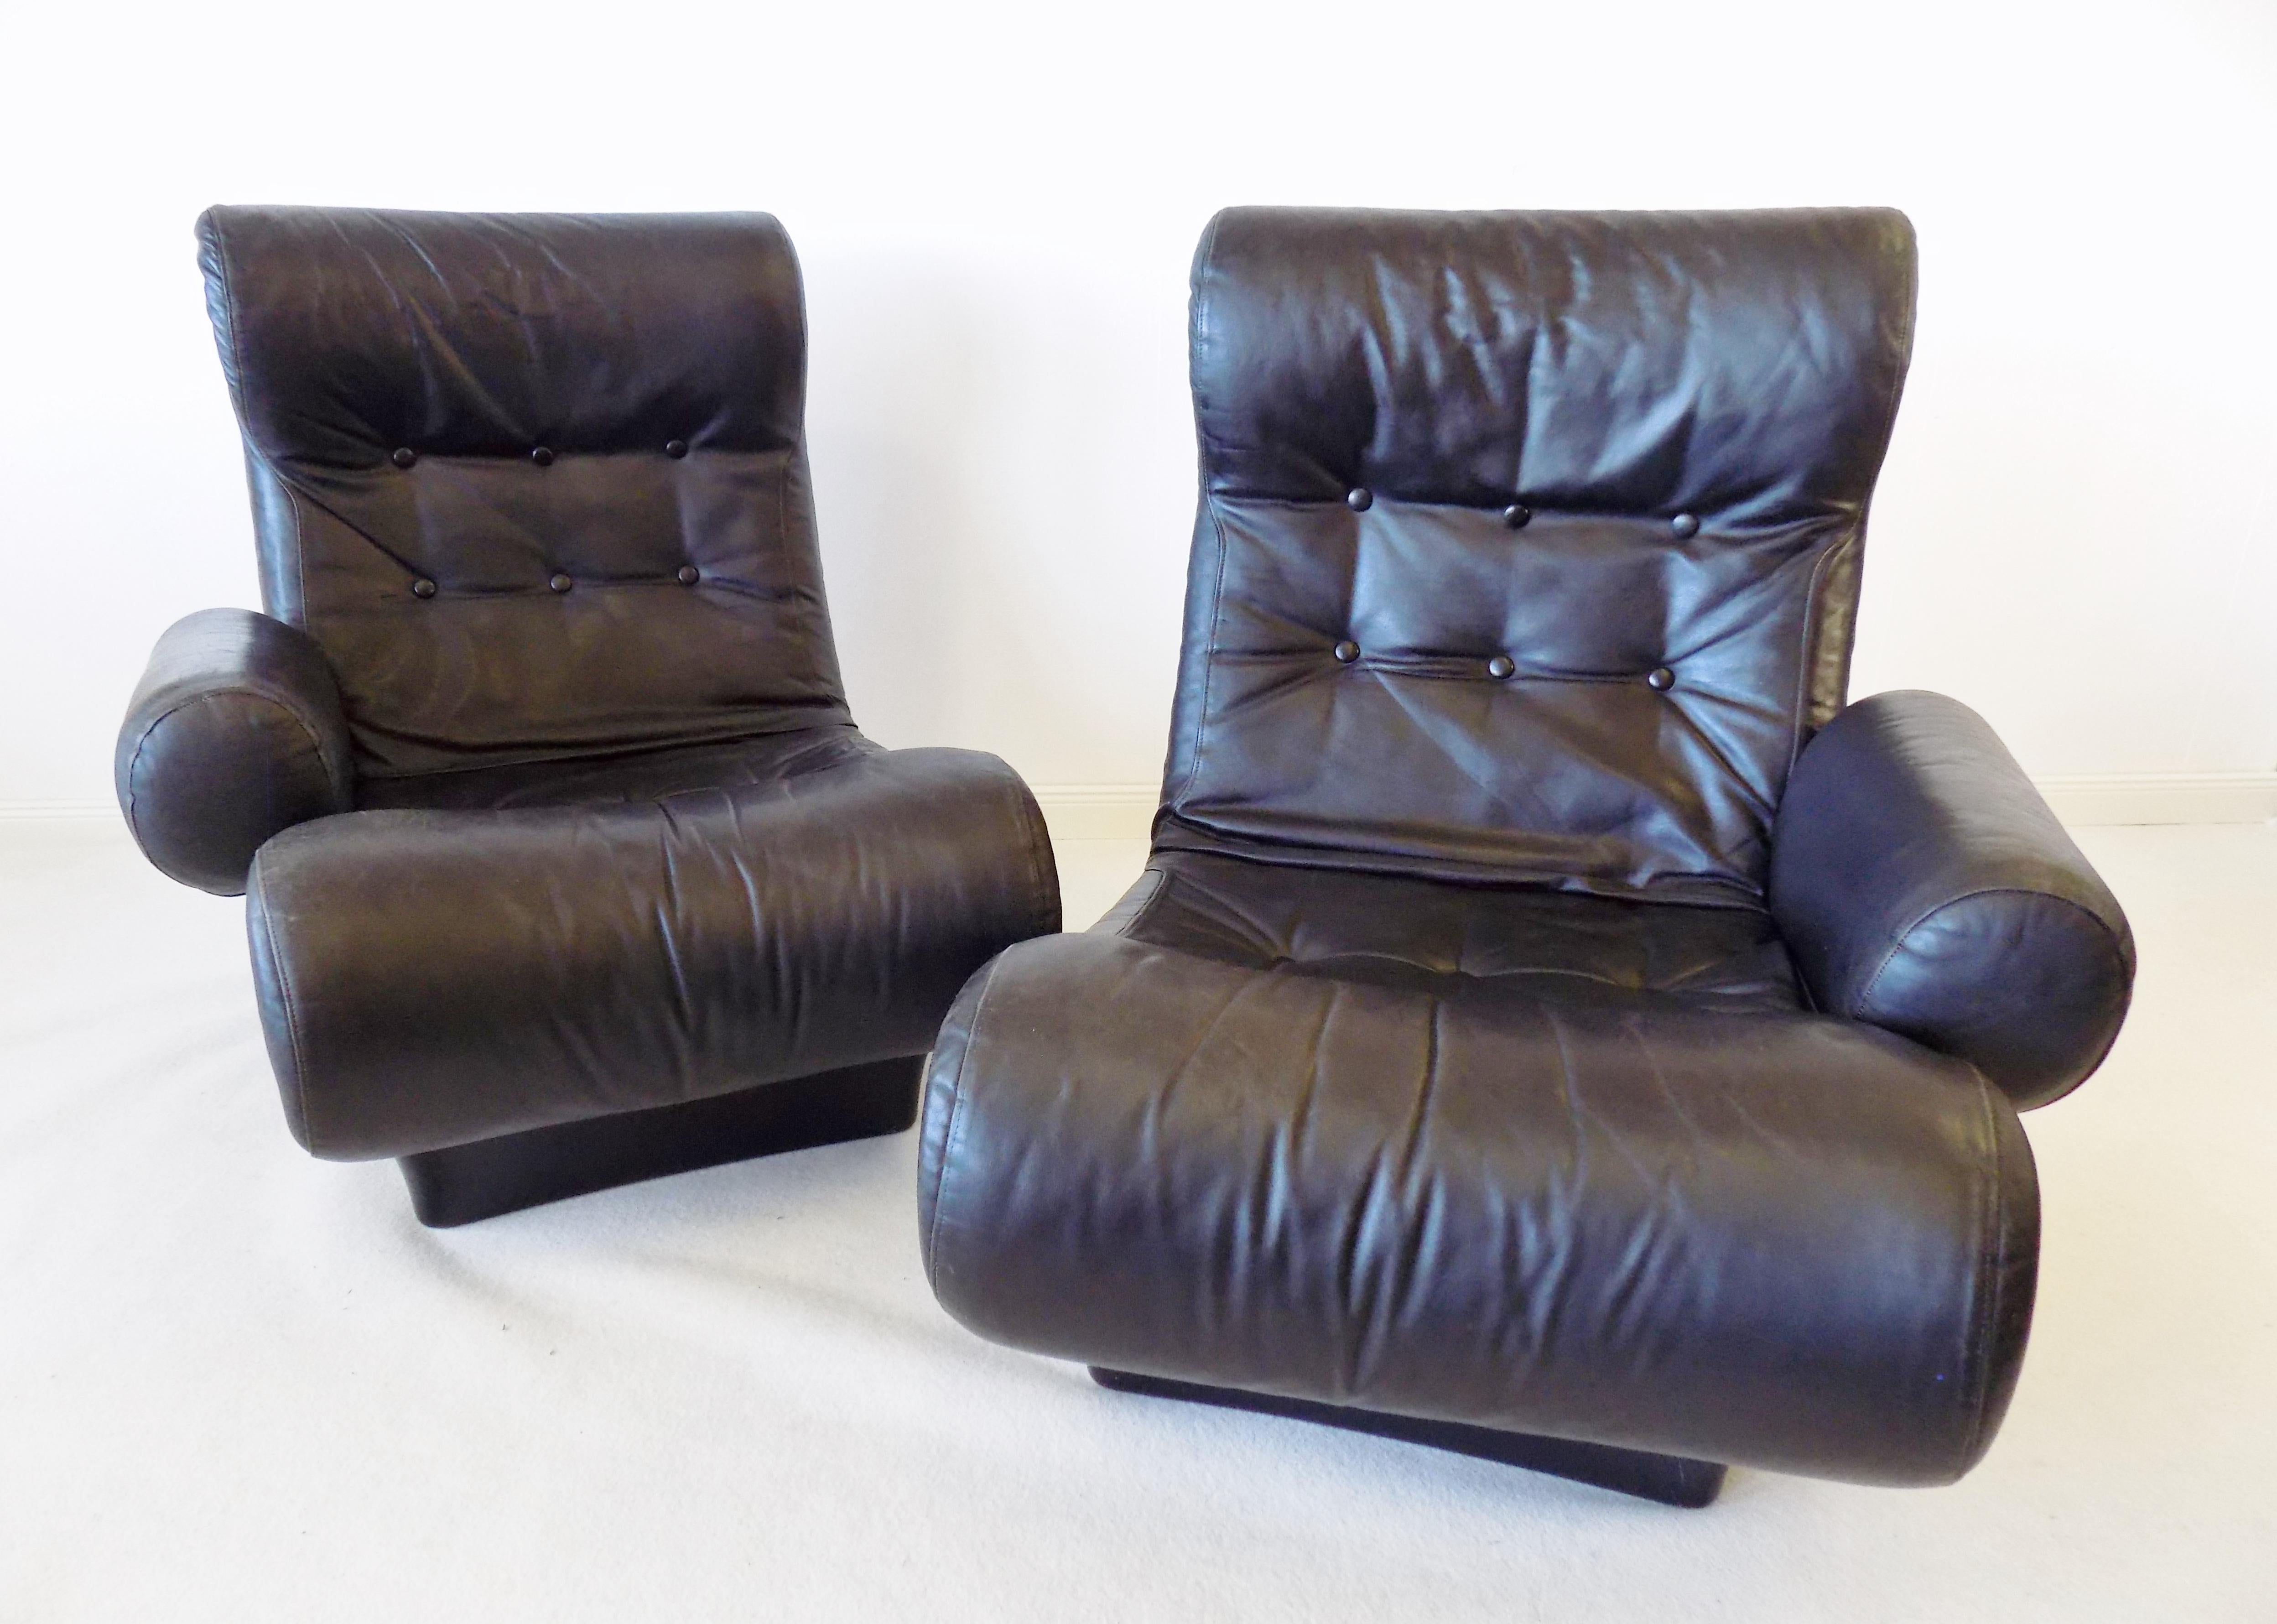 This as 2 seater created modul set from the Sofalette series of Otto Zapf was designed by him in the 70s. The black leather of the lounge chair moduls shows a fantastic Patina in some areas and comes in a good condition. As base the chairs have